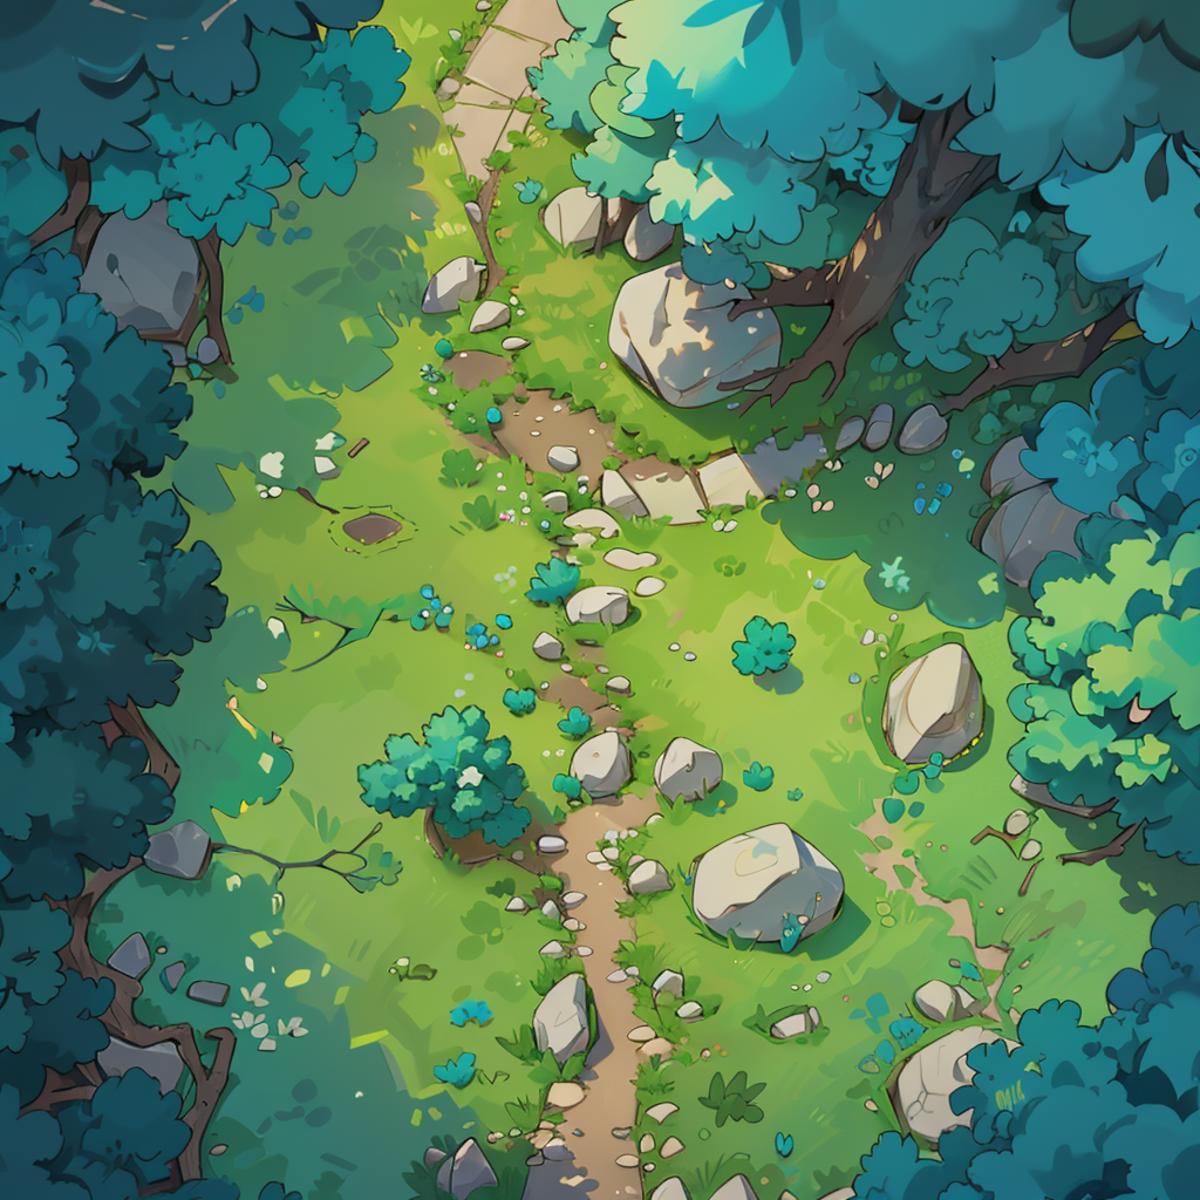 Battle Map (Forest) image by aji1